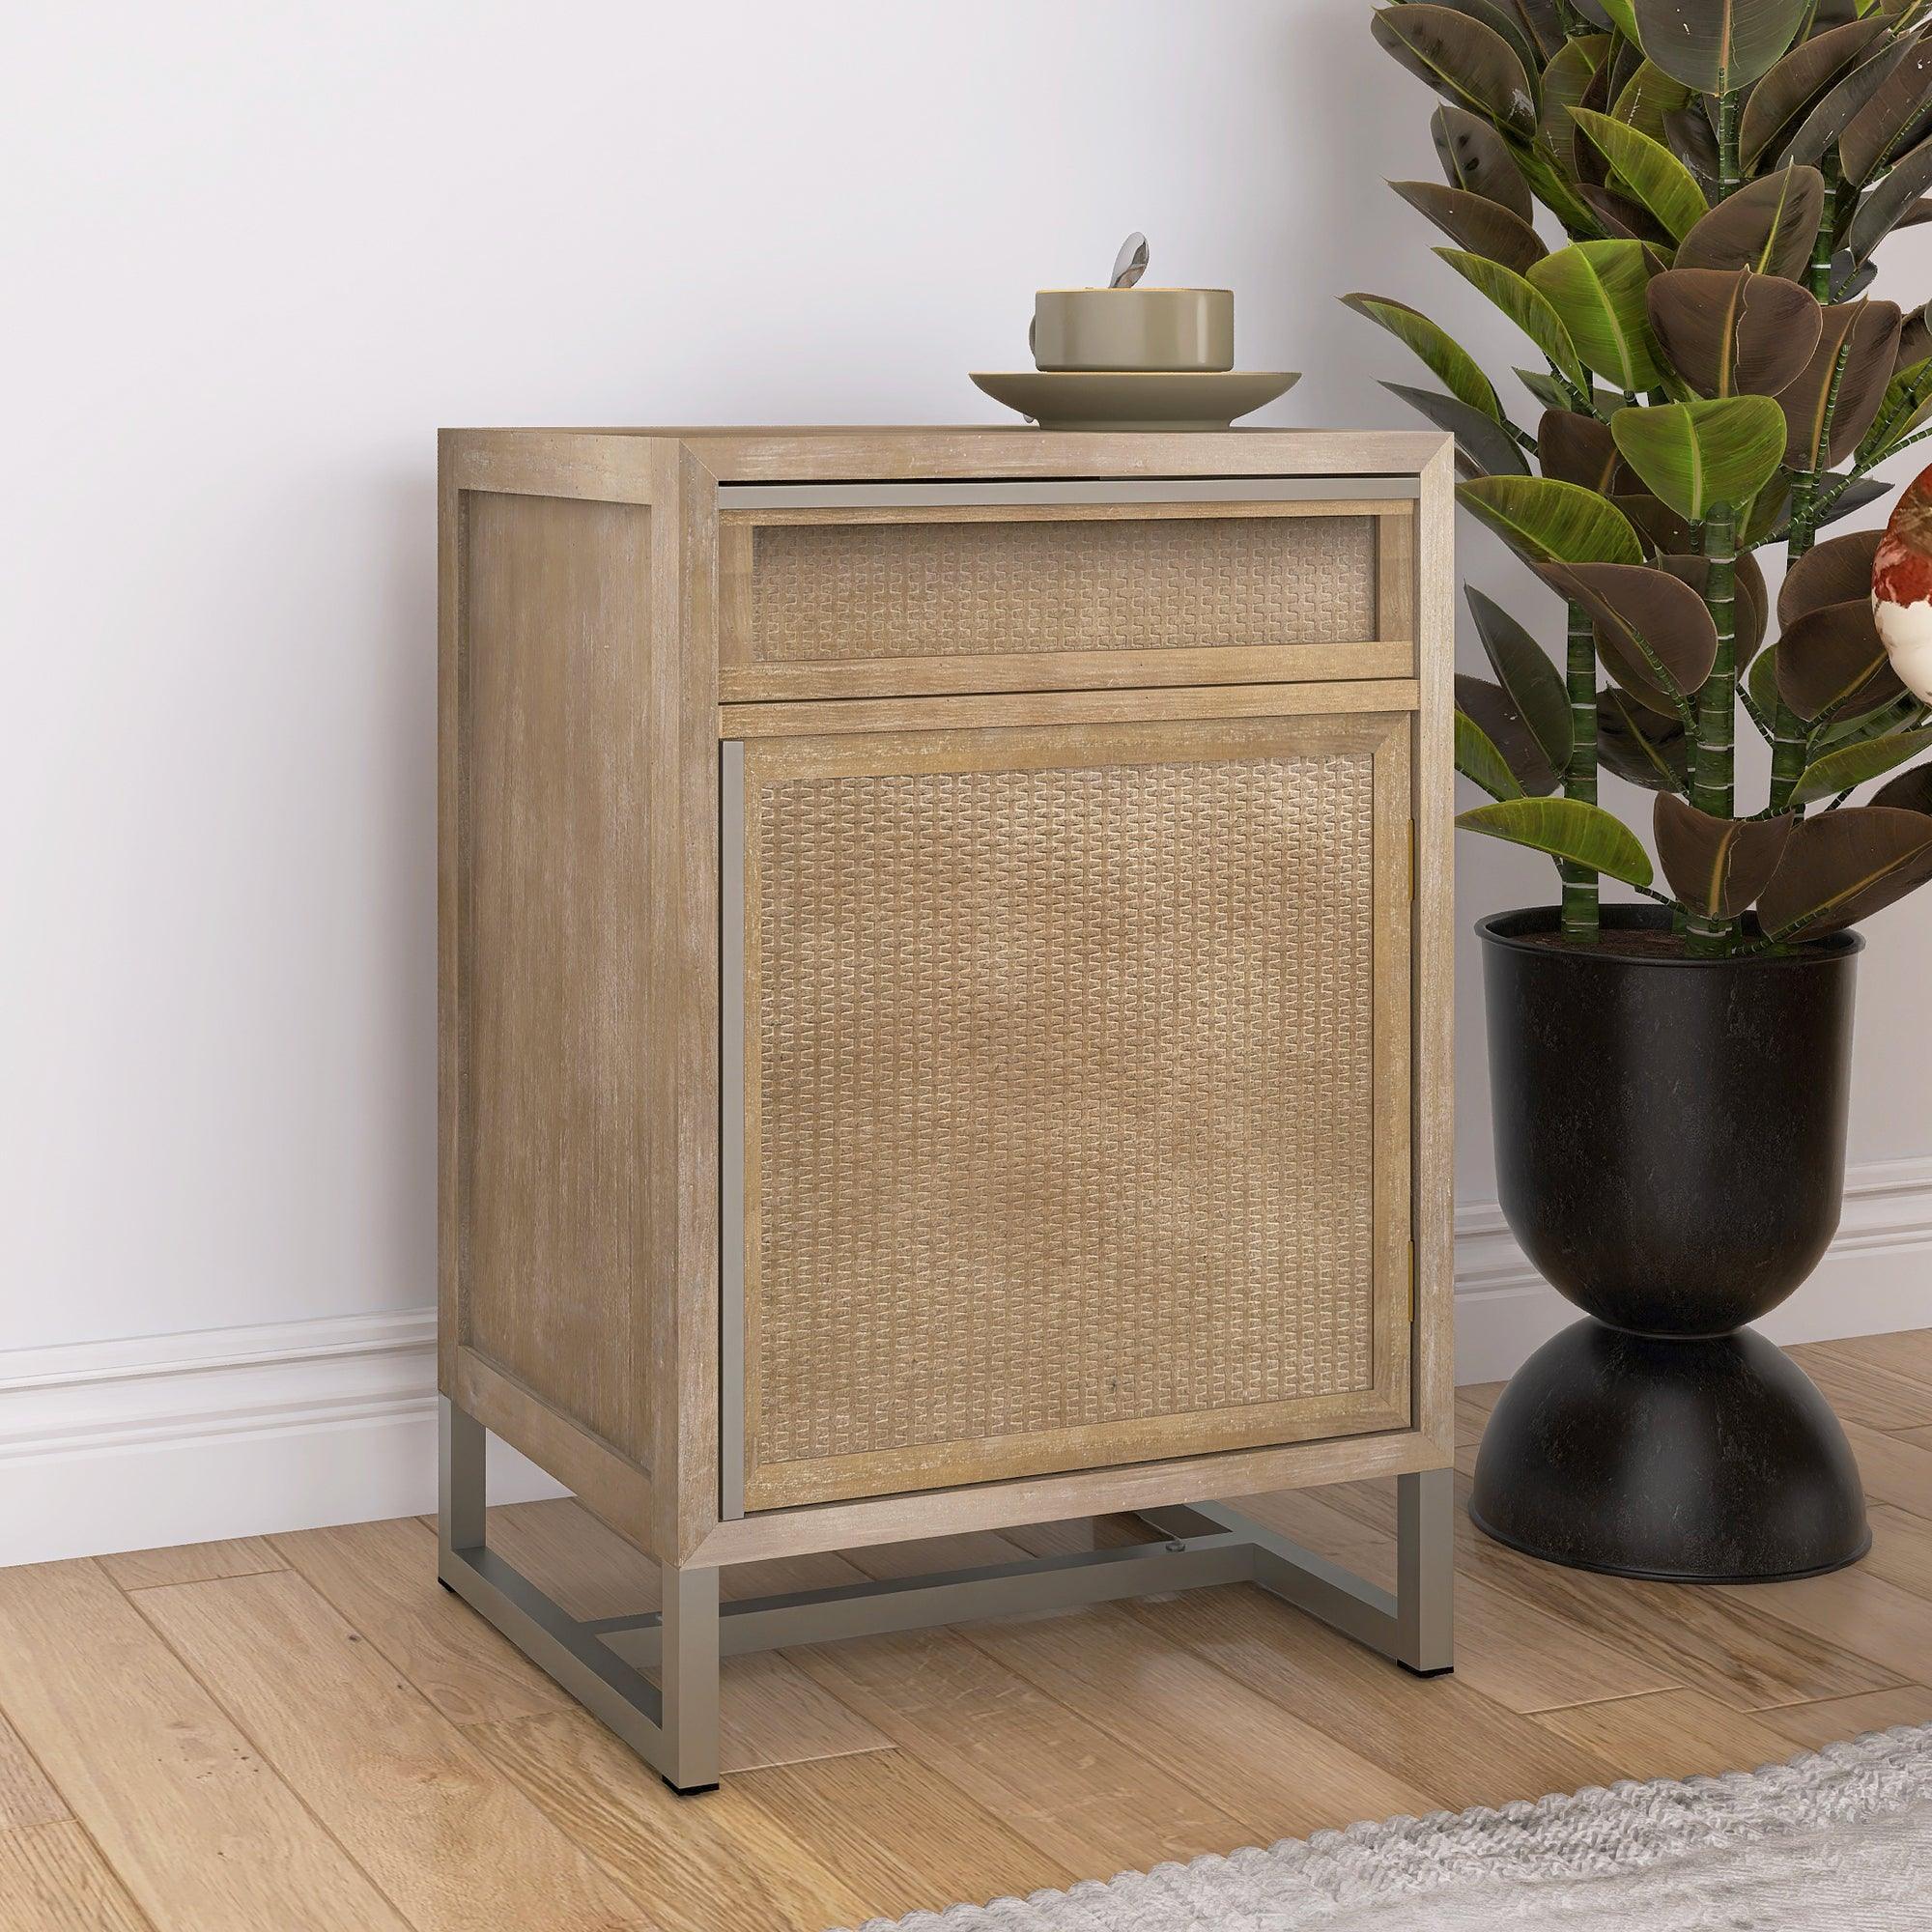 Handwoven End Table With Drawer, Cabinet, And Artisanal Wood Finish - No Assembly Required